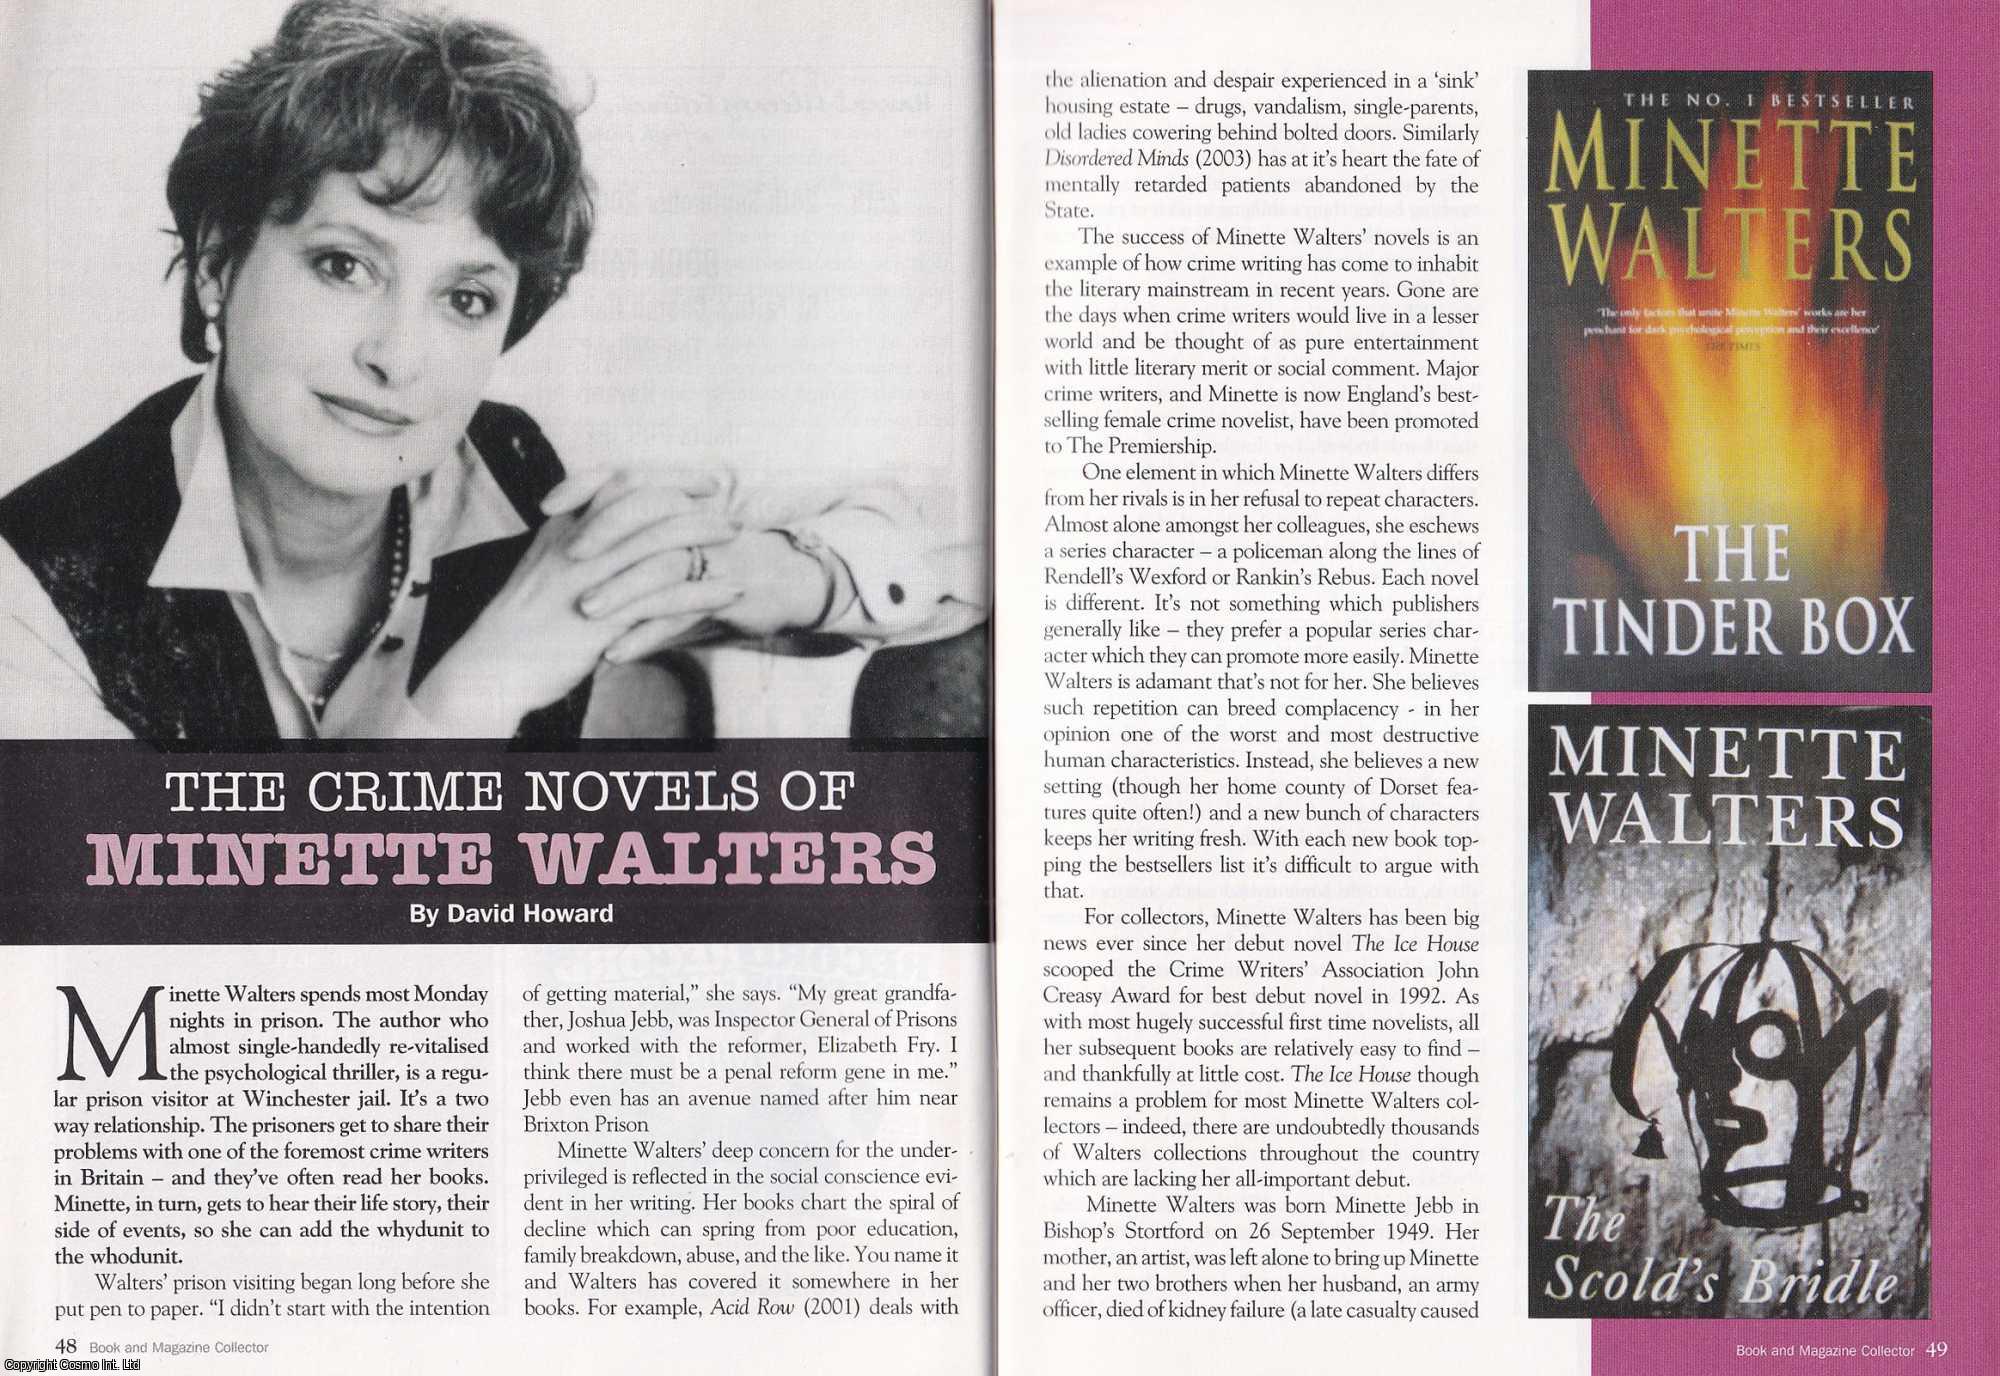 David Howard - The Crime Novels of Minette Walters. This is an original article separated from an issue of The Book & Magazine Collector publication, 2008.